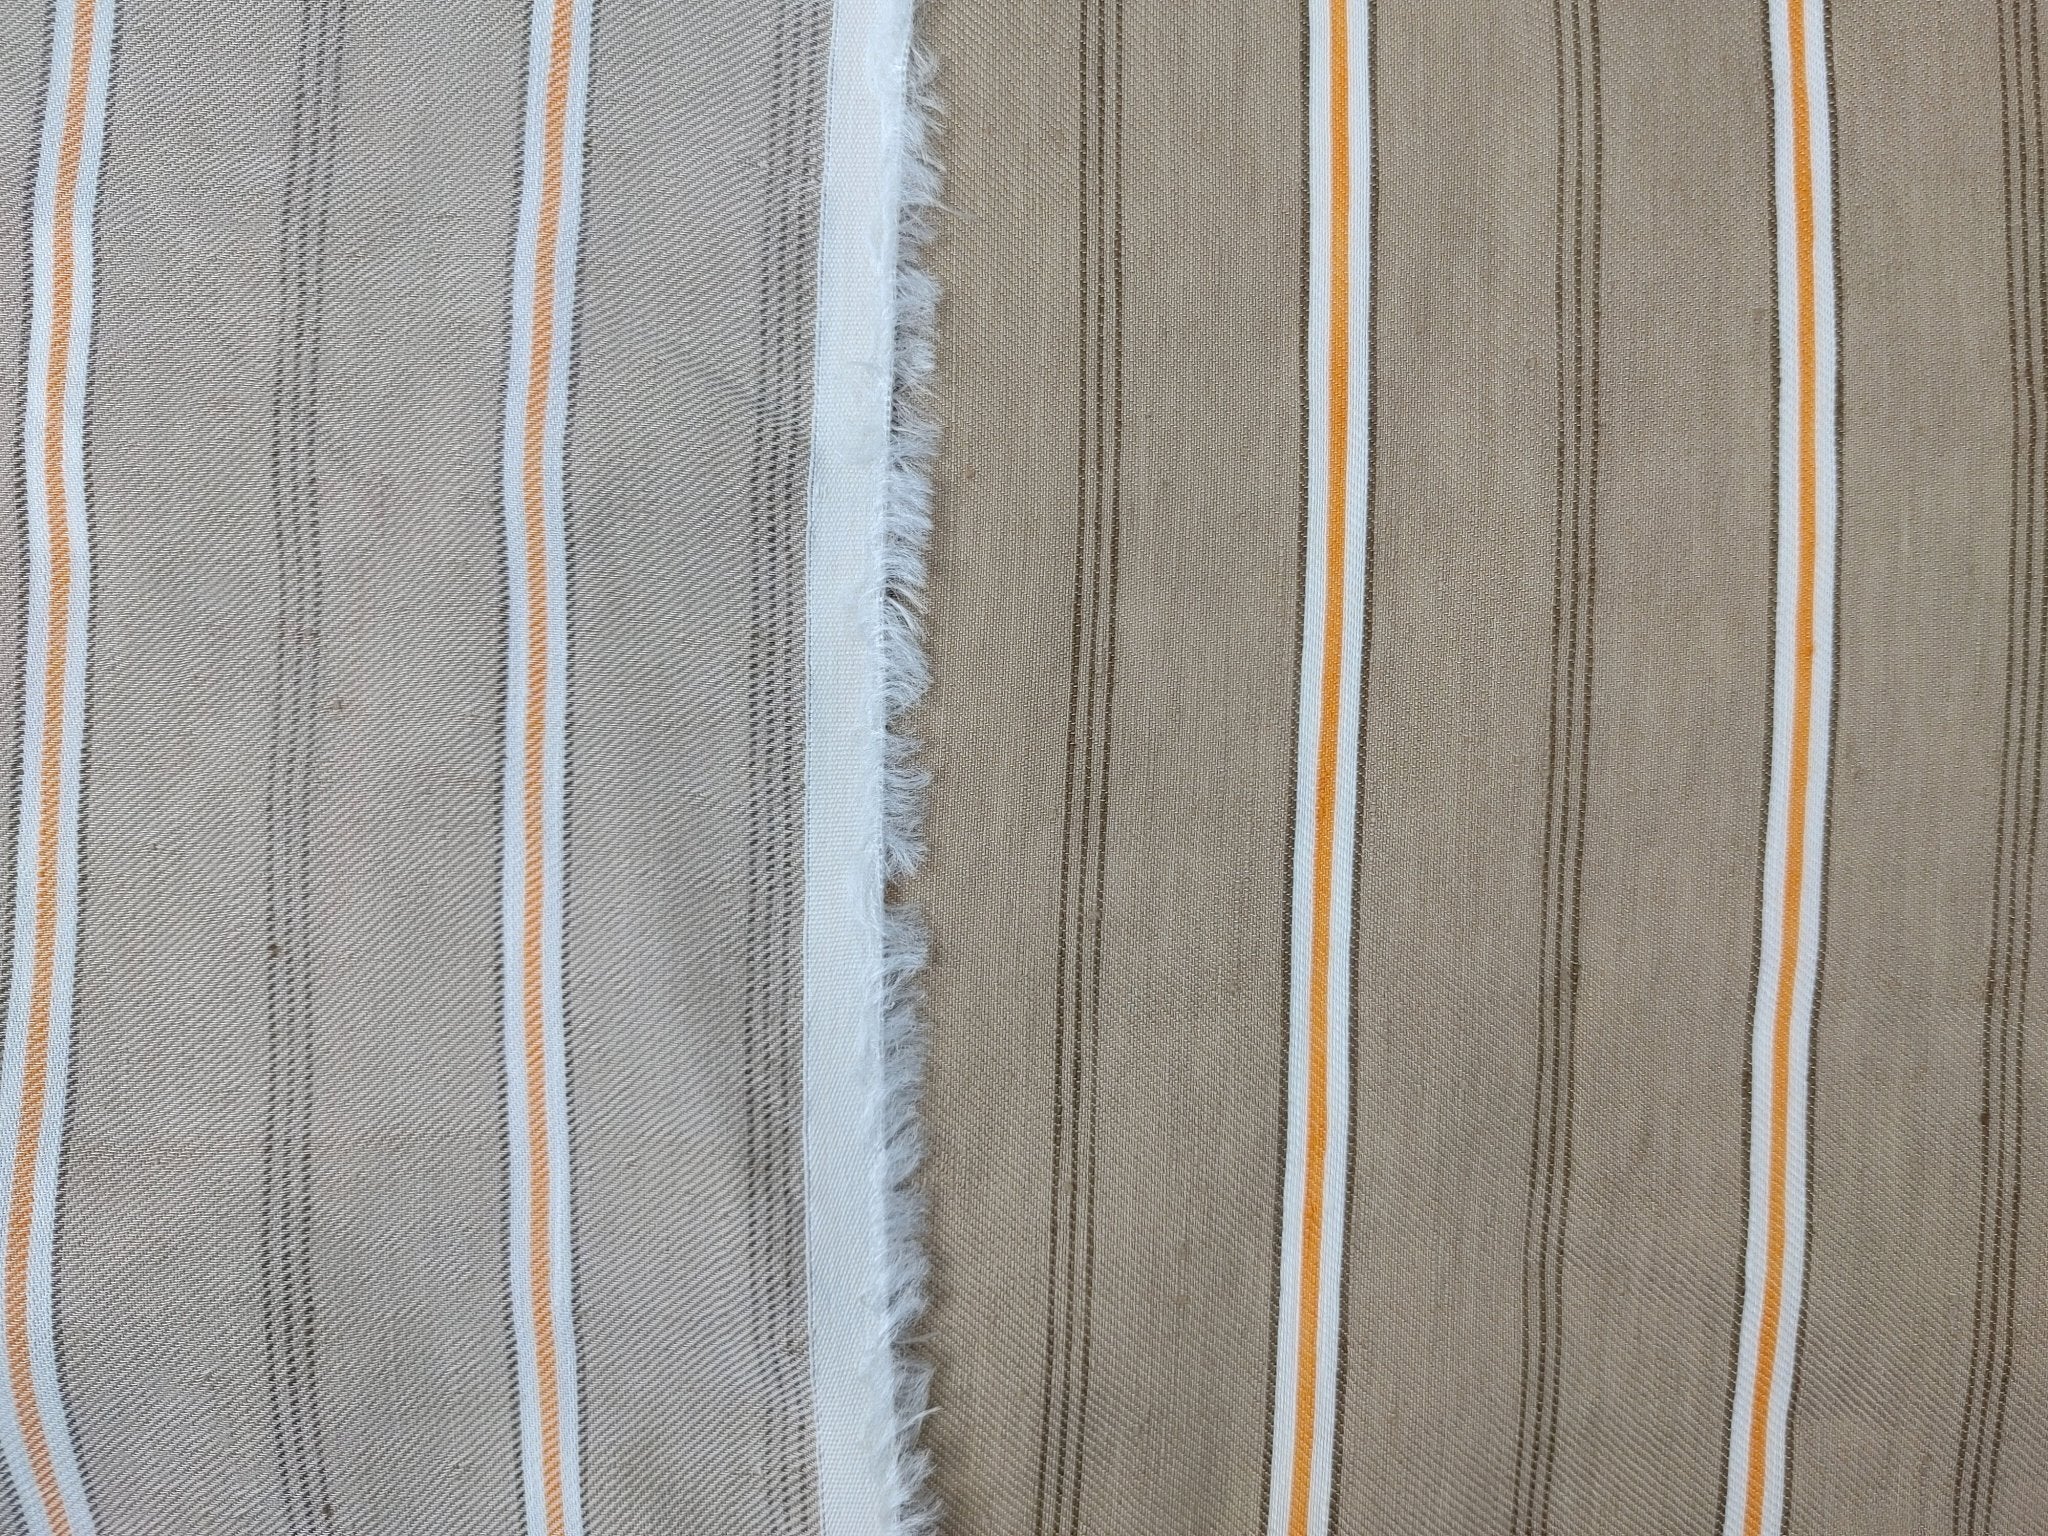 Linen Rayon Twill Fabric with Stripe Pattern, Subtle Glossy Effect 6809 6810 7154 - The Linen Lab - Beige